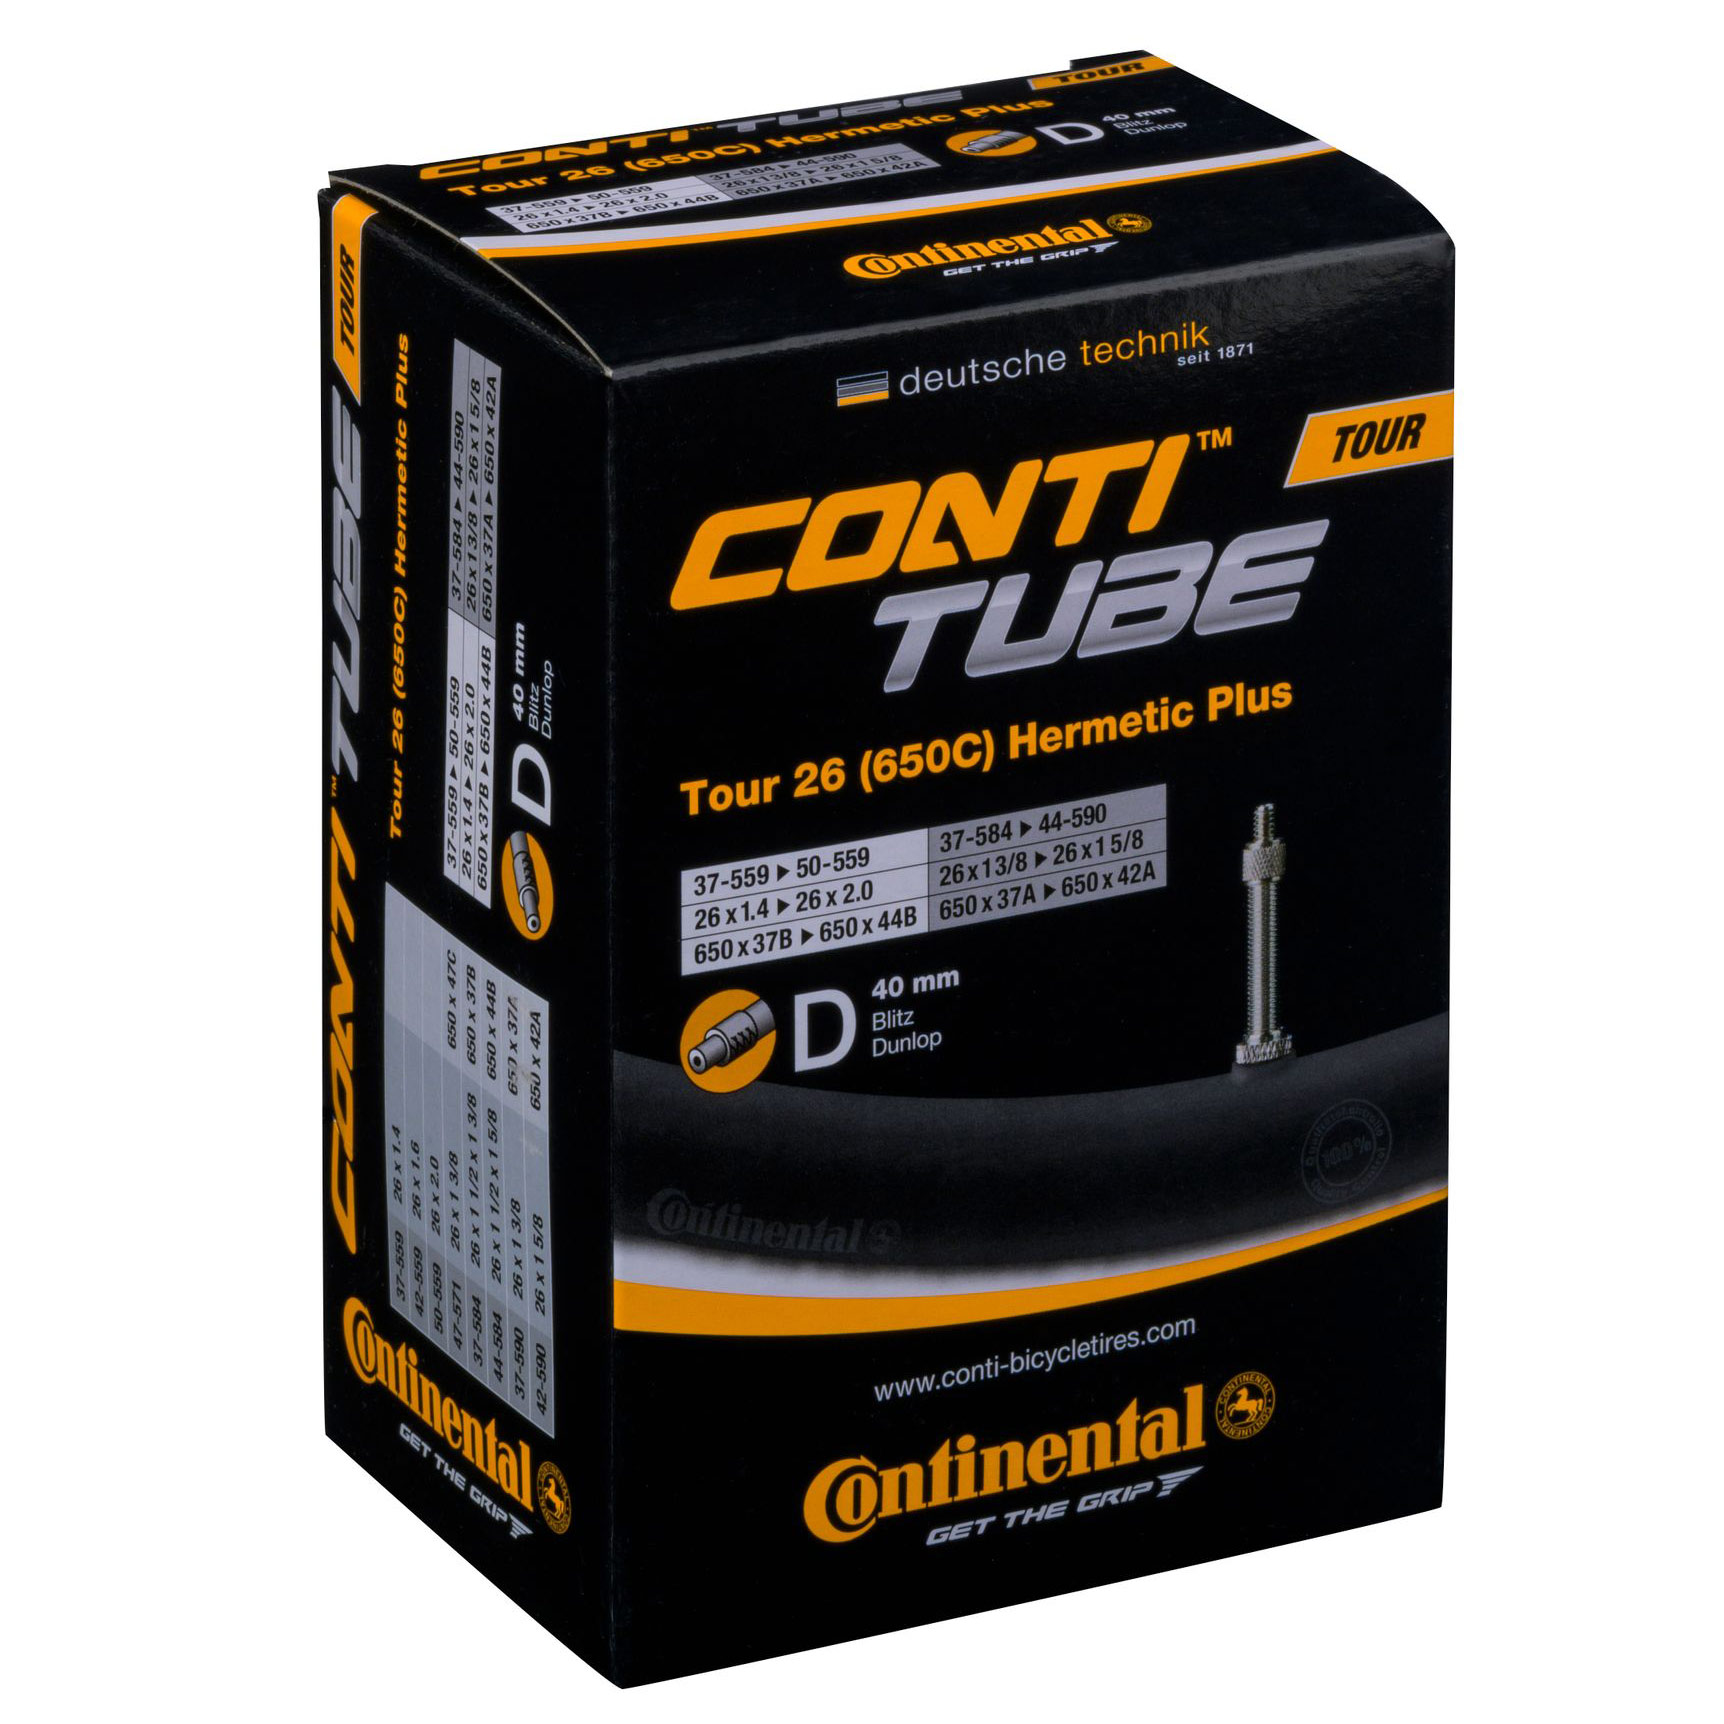 Picture of Continental Tour 26 Hermetic Plus Tube